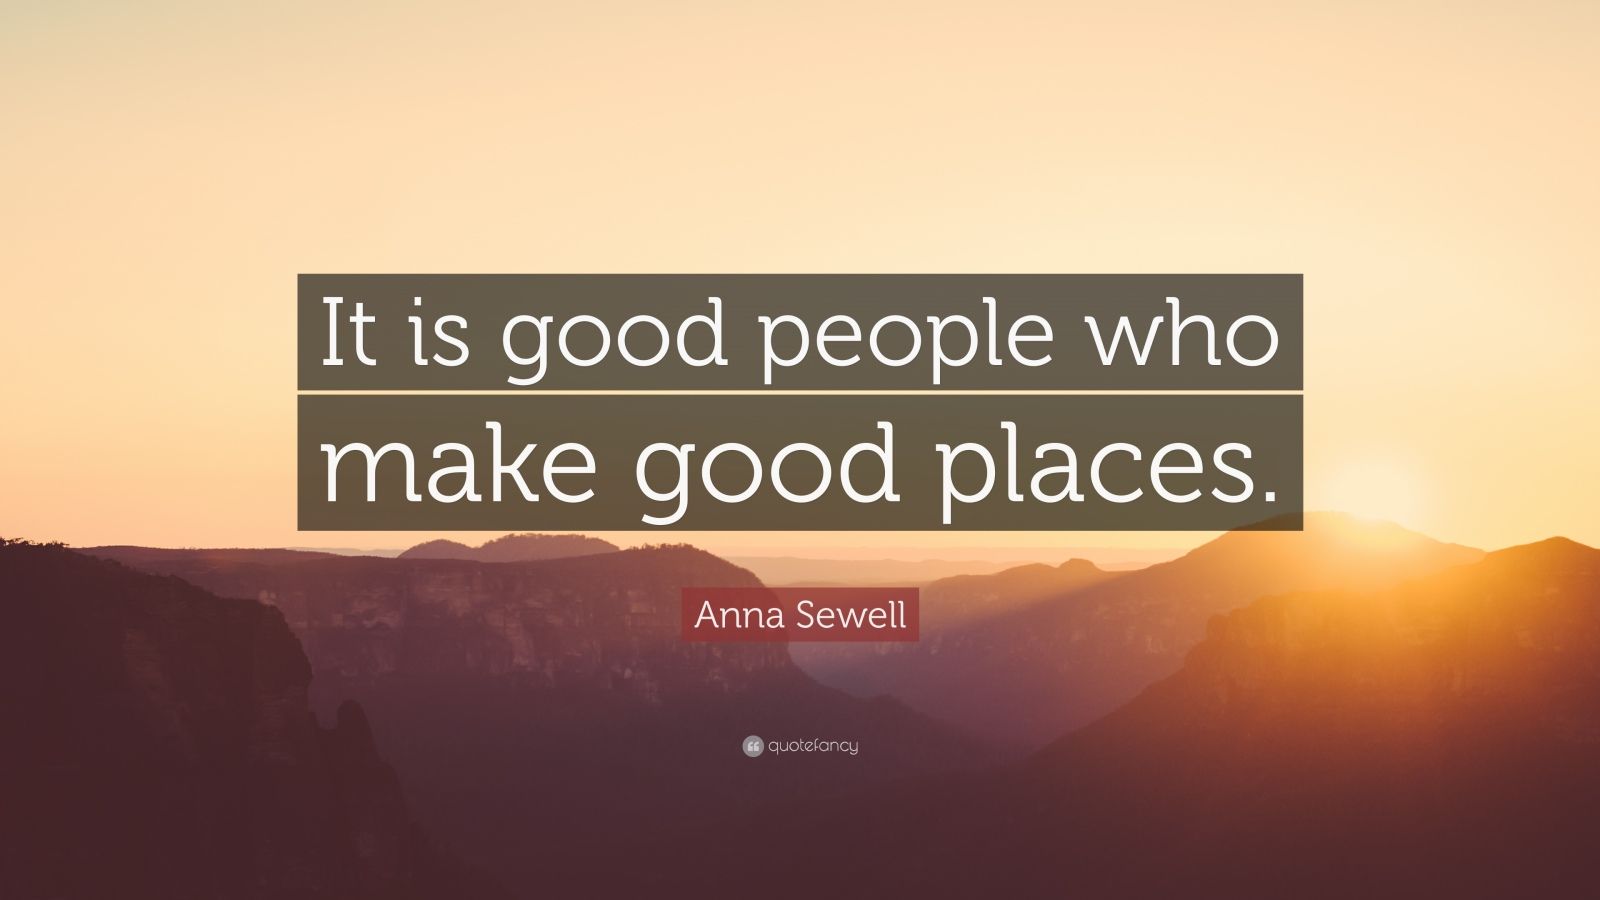 Anna Sewell Quote: “It is good people who make good places.” (9